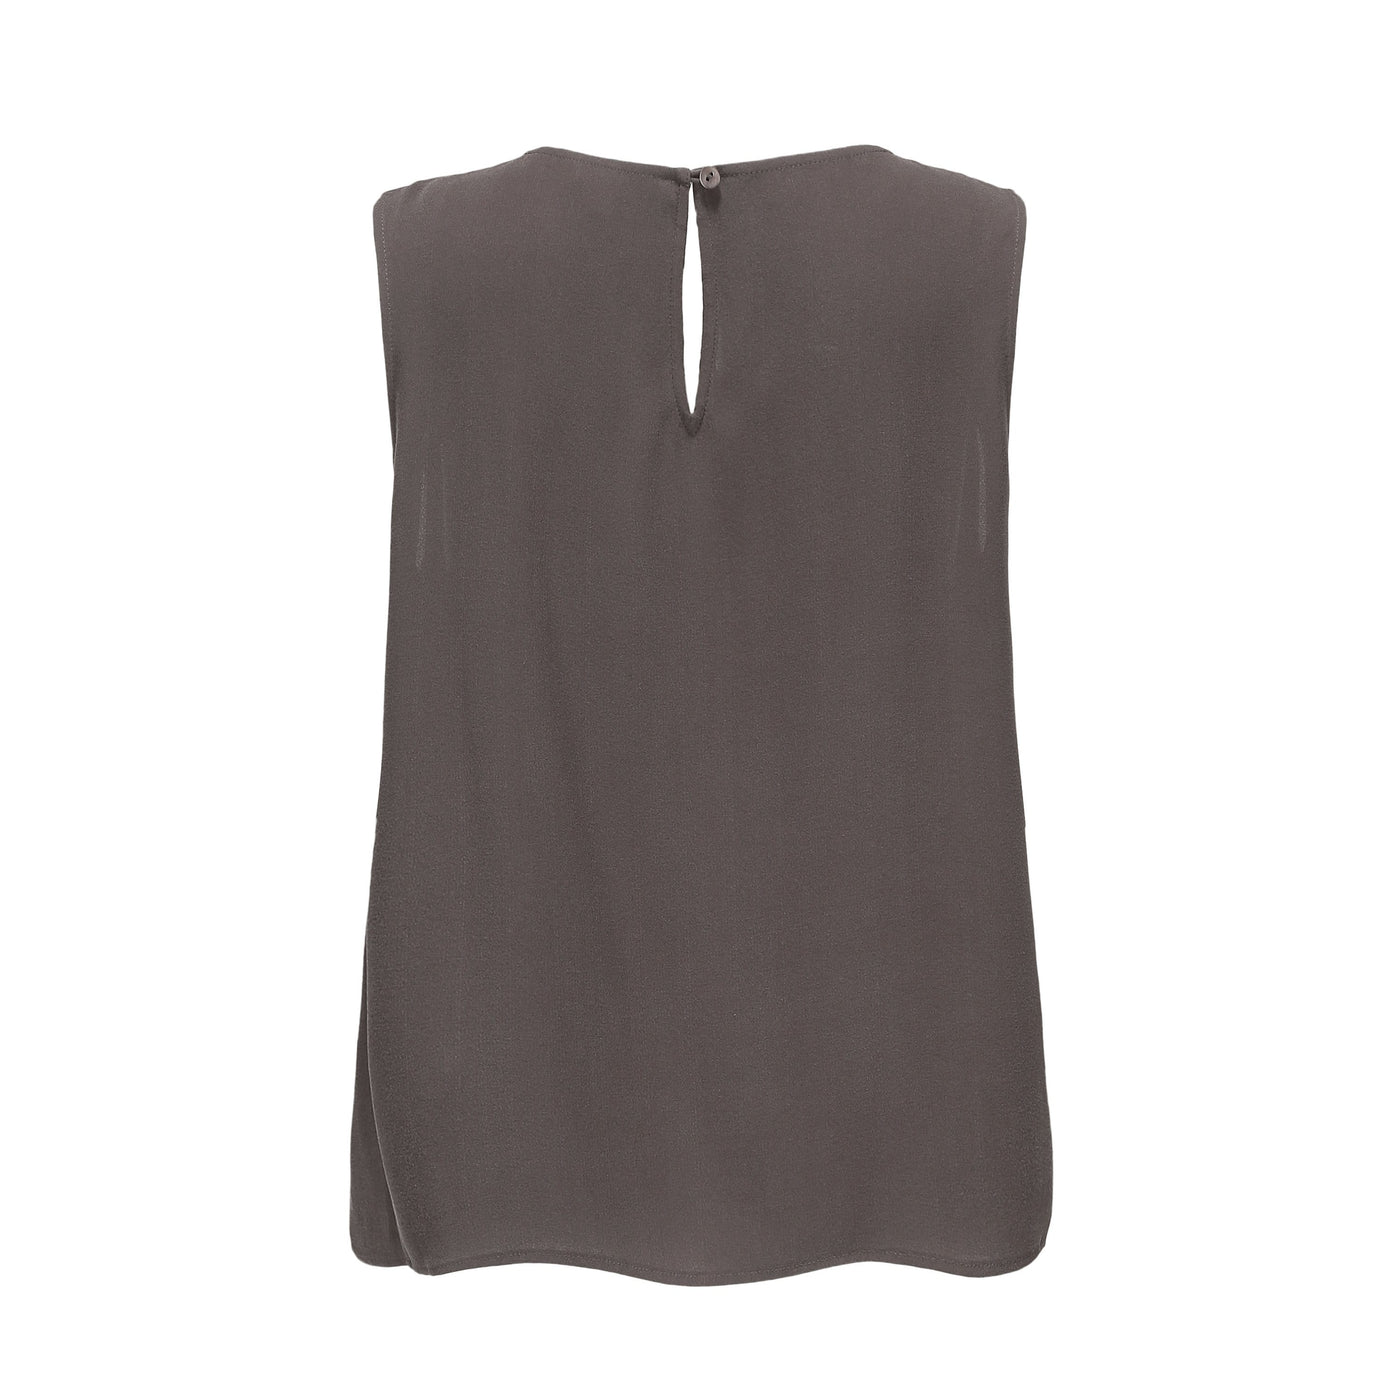 LILLY PILLY Collection bluesign® certified silk Lulu Tank in Chocolate as 3D model showing back view